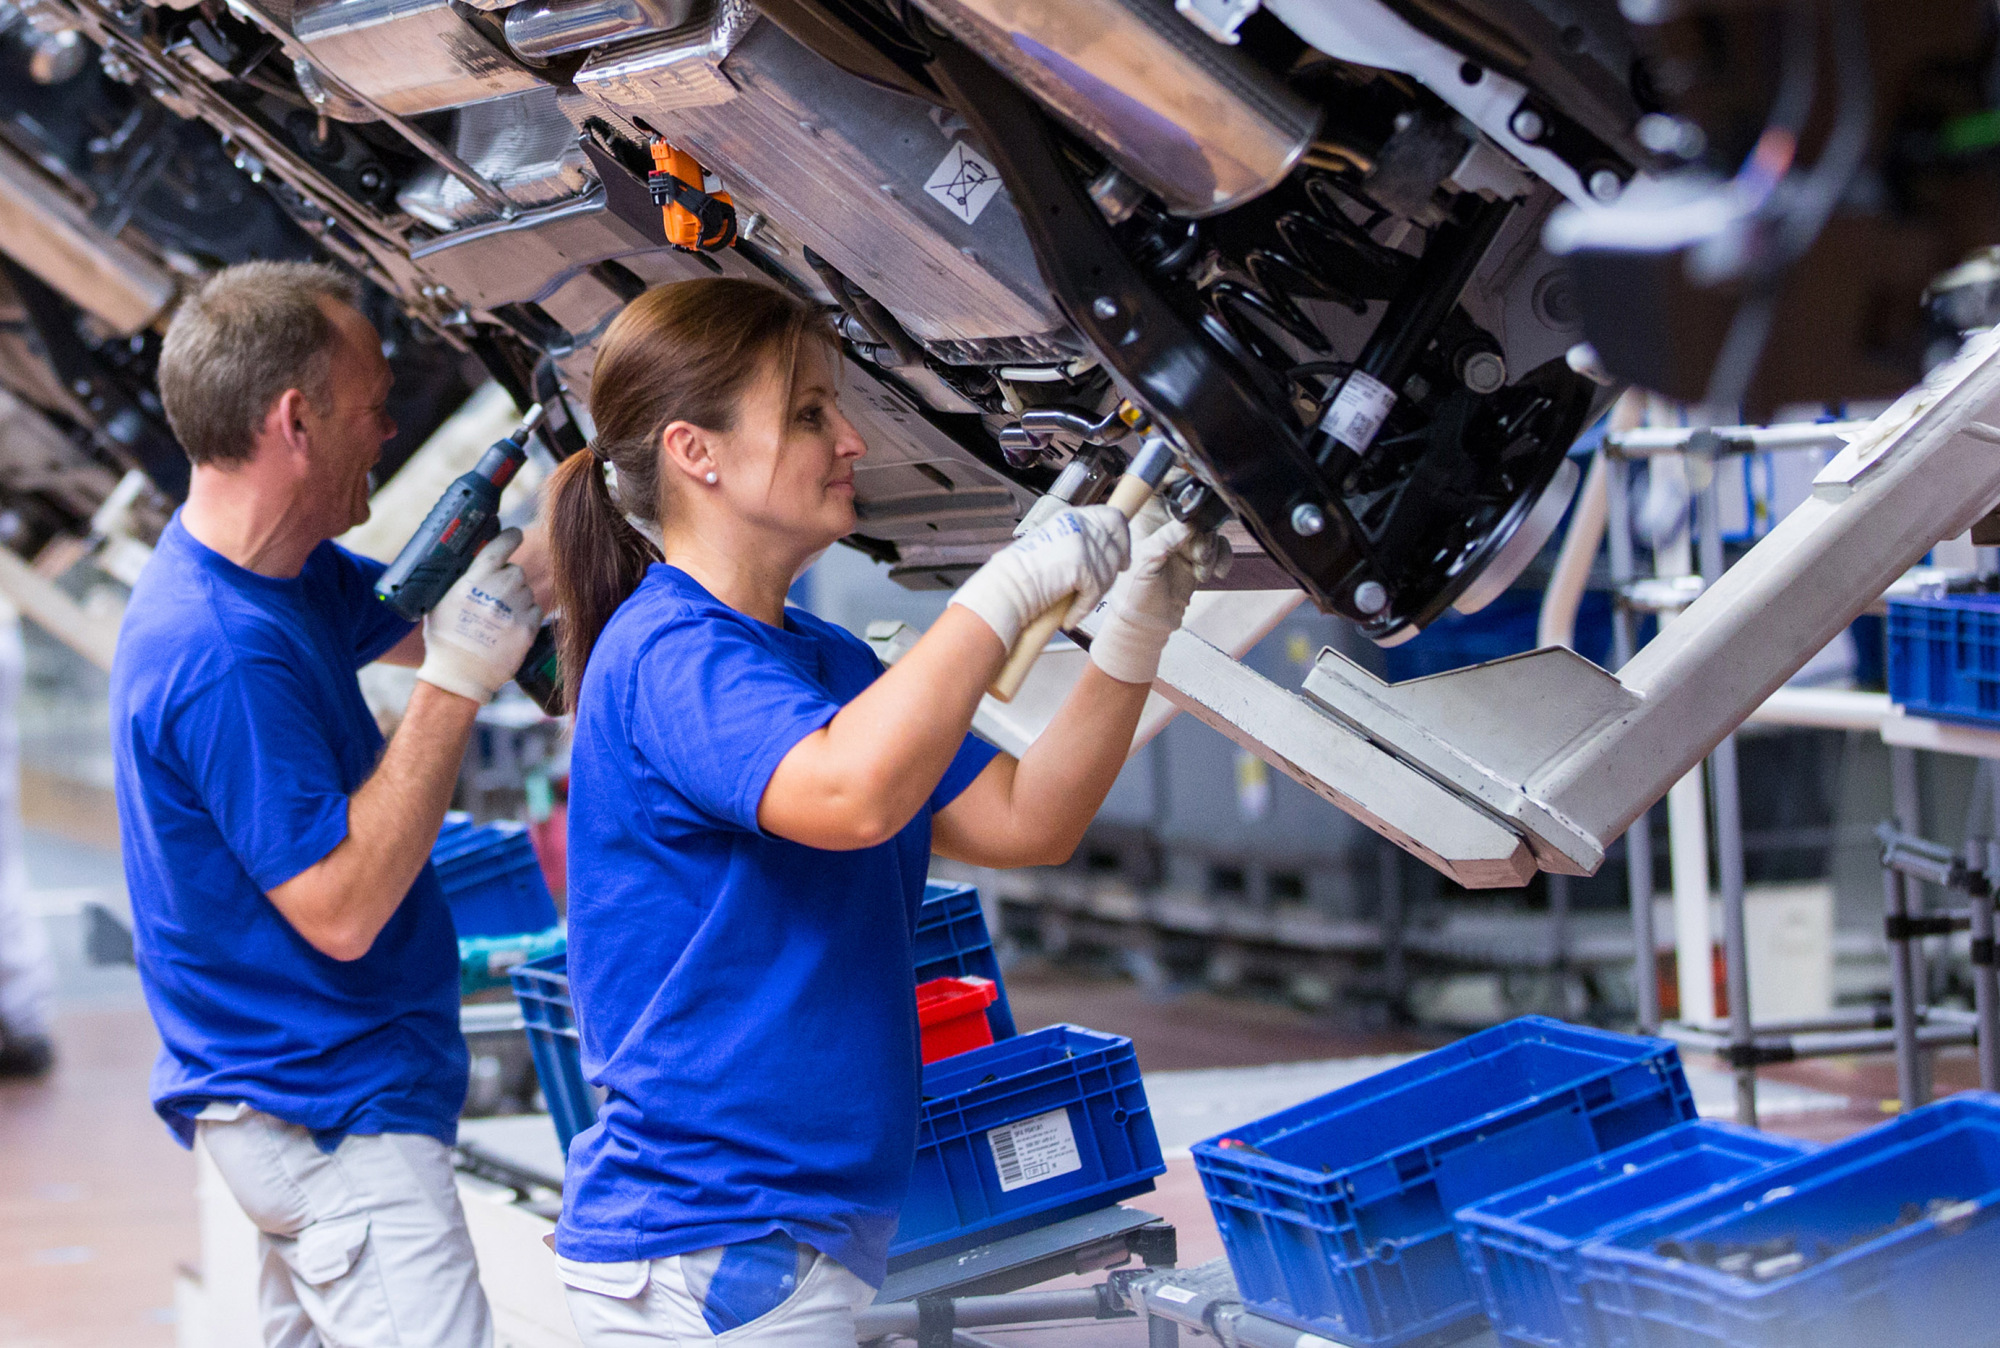 Employees work on Volkswagen e-Golf electric automobiles on the assembly line inside the Volkswagen AG (VW) factory in Wolfsburg, Germany, on Friday, May 20, 2016. Volkswagen AG agreed to raise German workers' pay after labor leaders vowed that employees wont foot the multi-billion-euro bill to resolve its diesel-emissions scandal.
